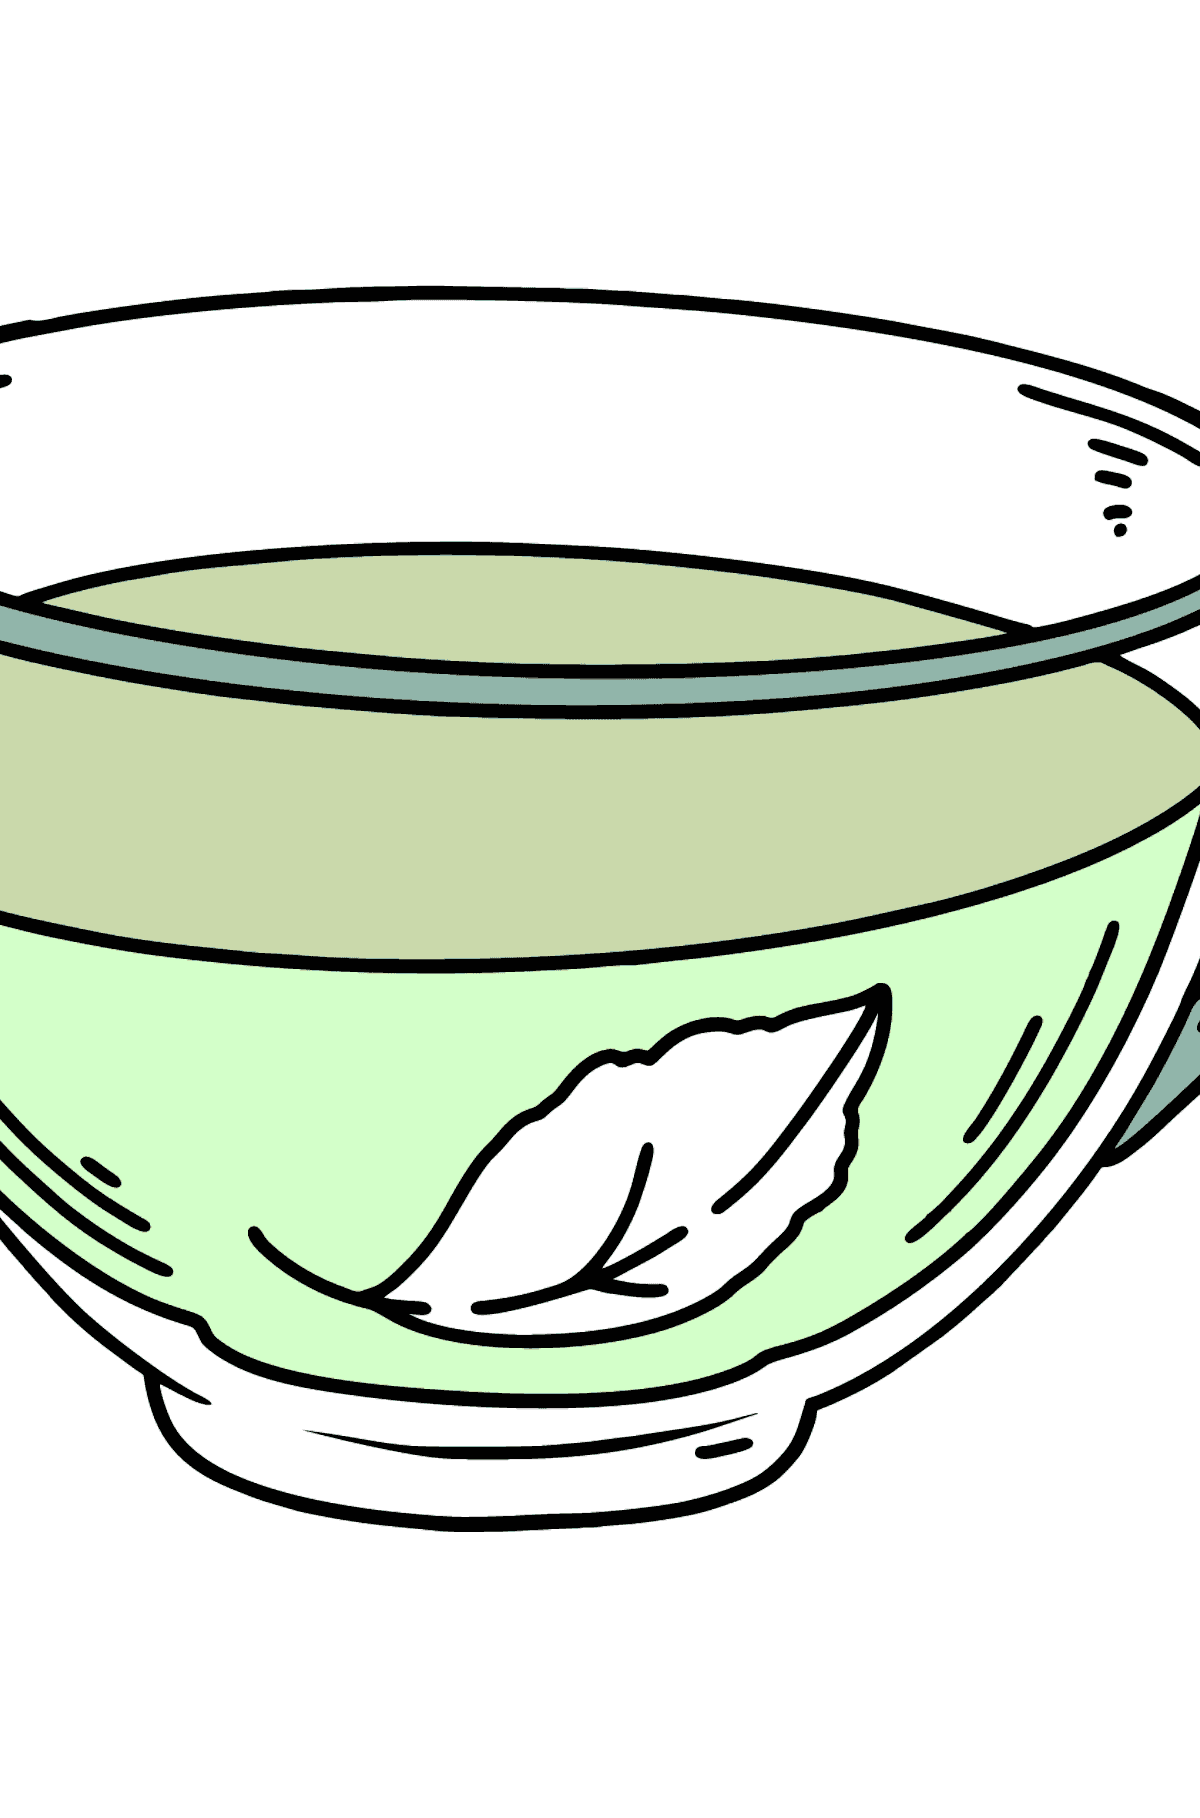 Green Tea coloring page - Coloring Pages for Kids